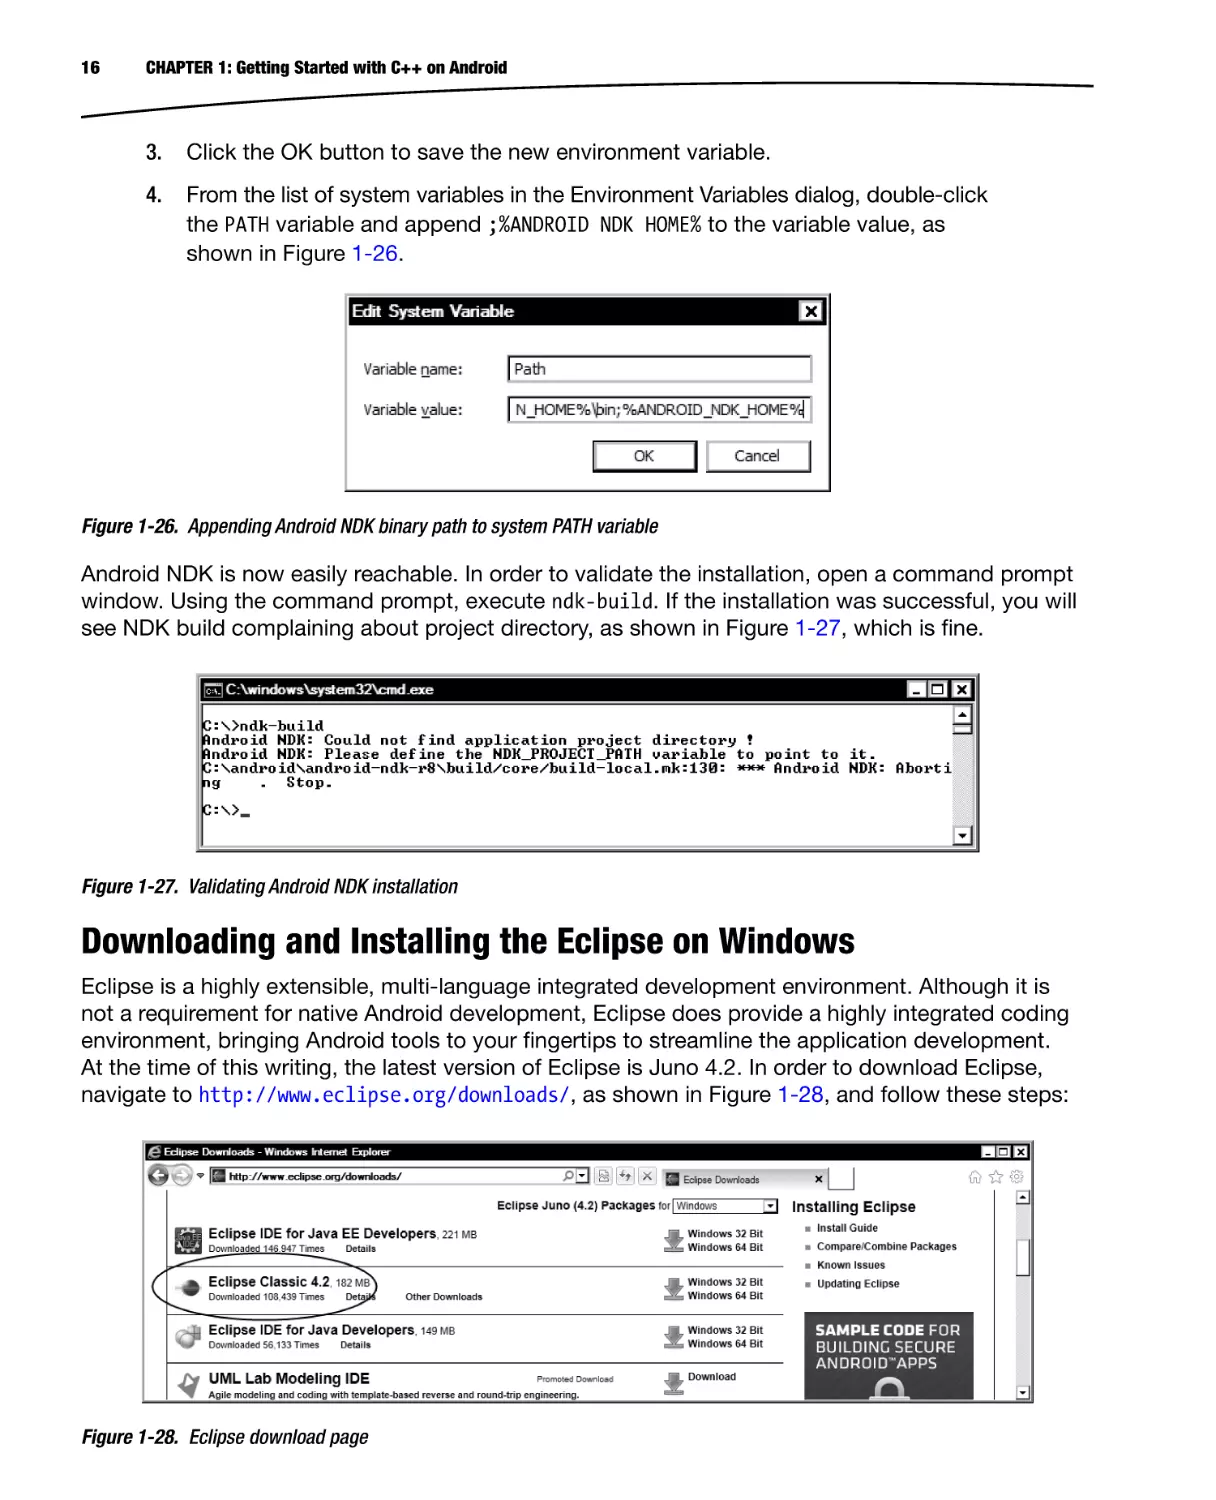 Downloading and Installing the Eclipse on Windows